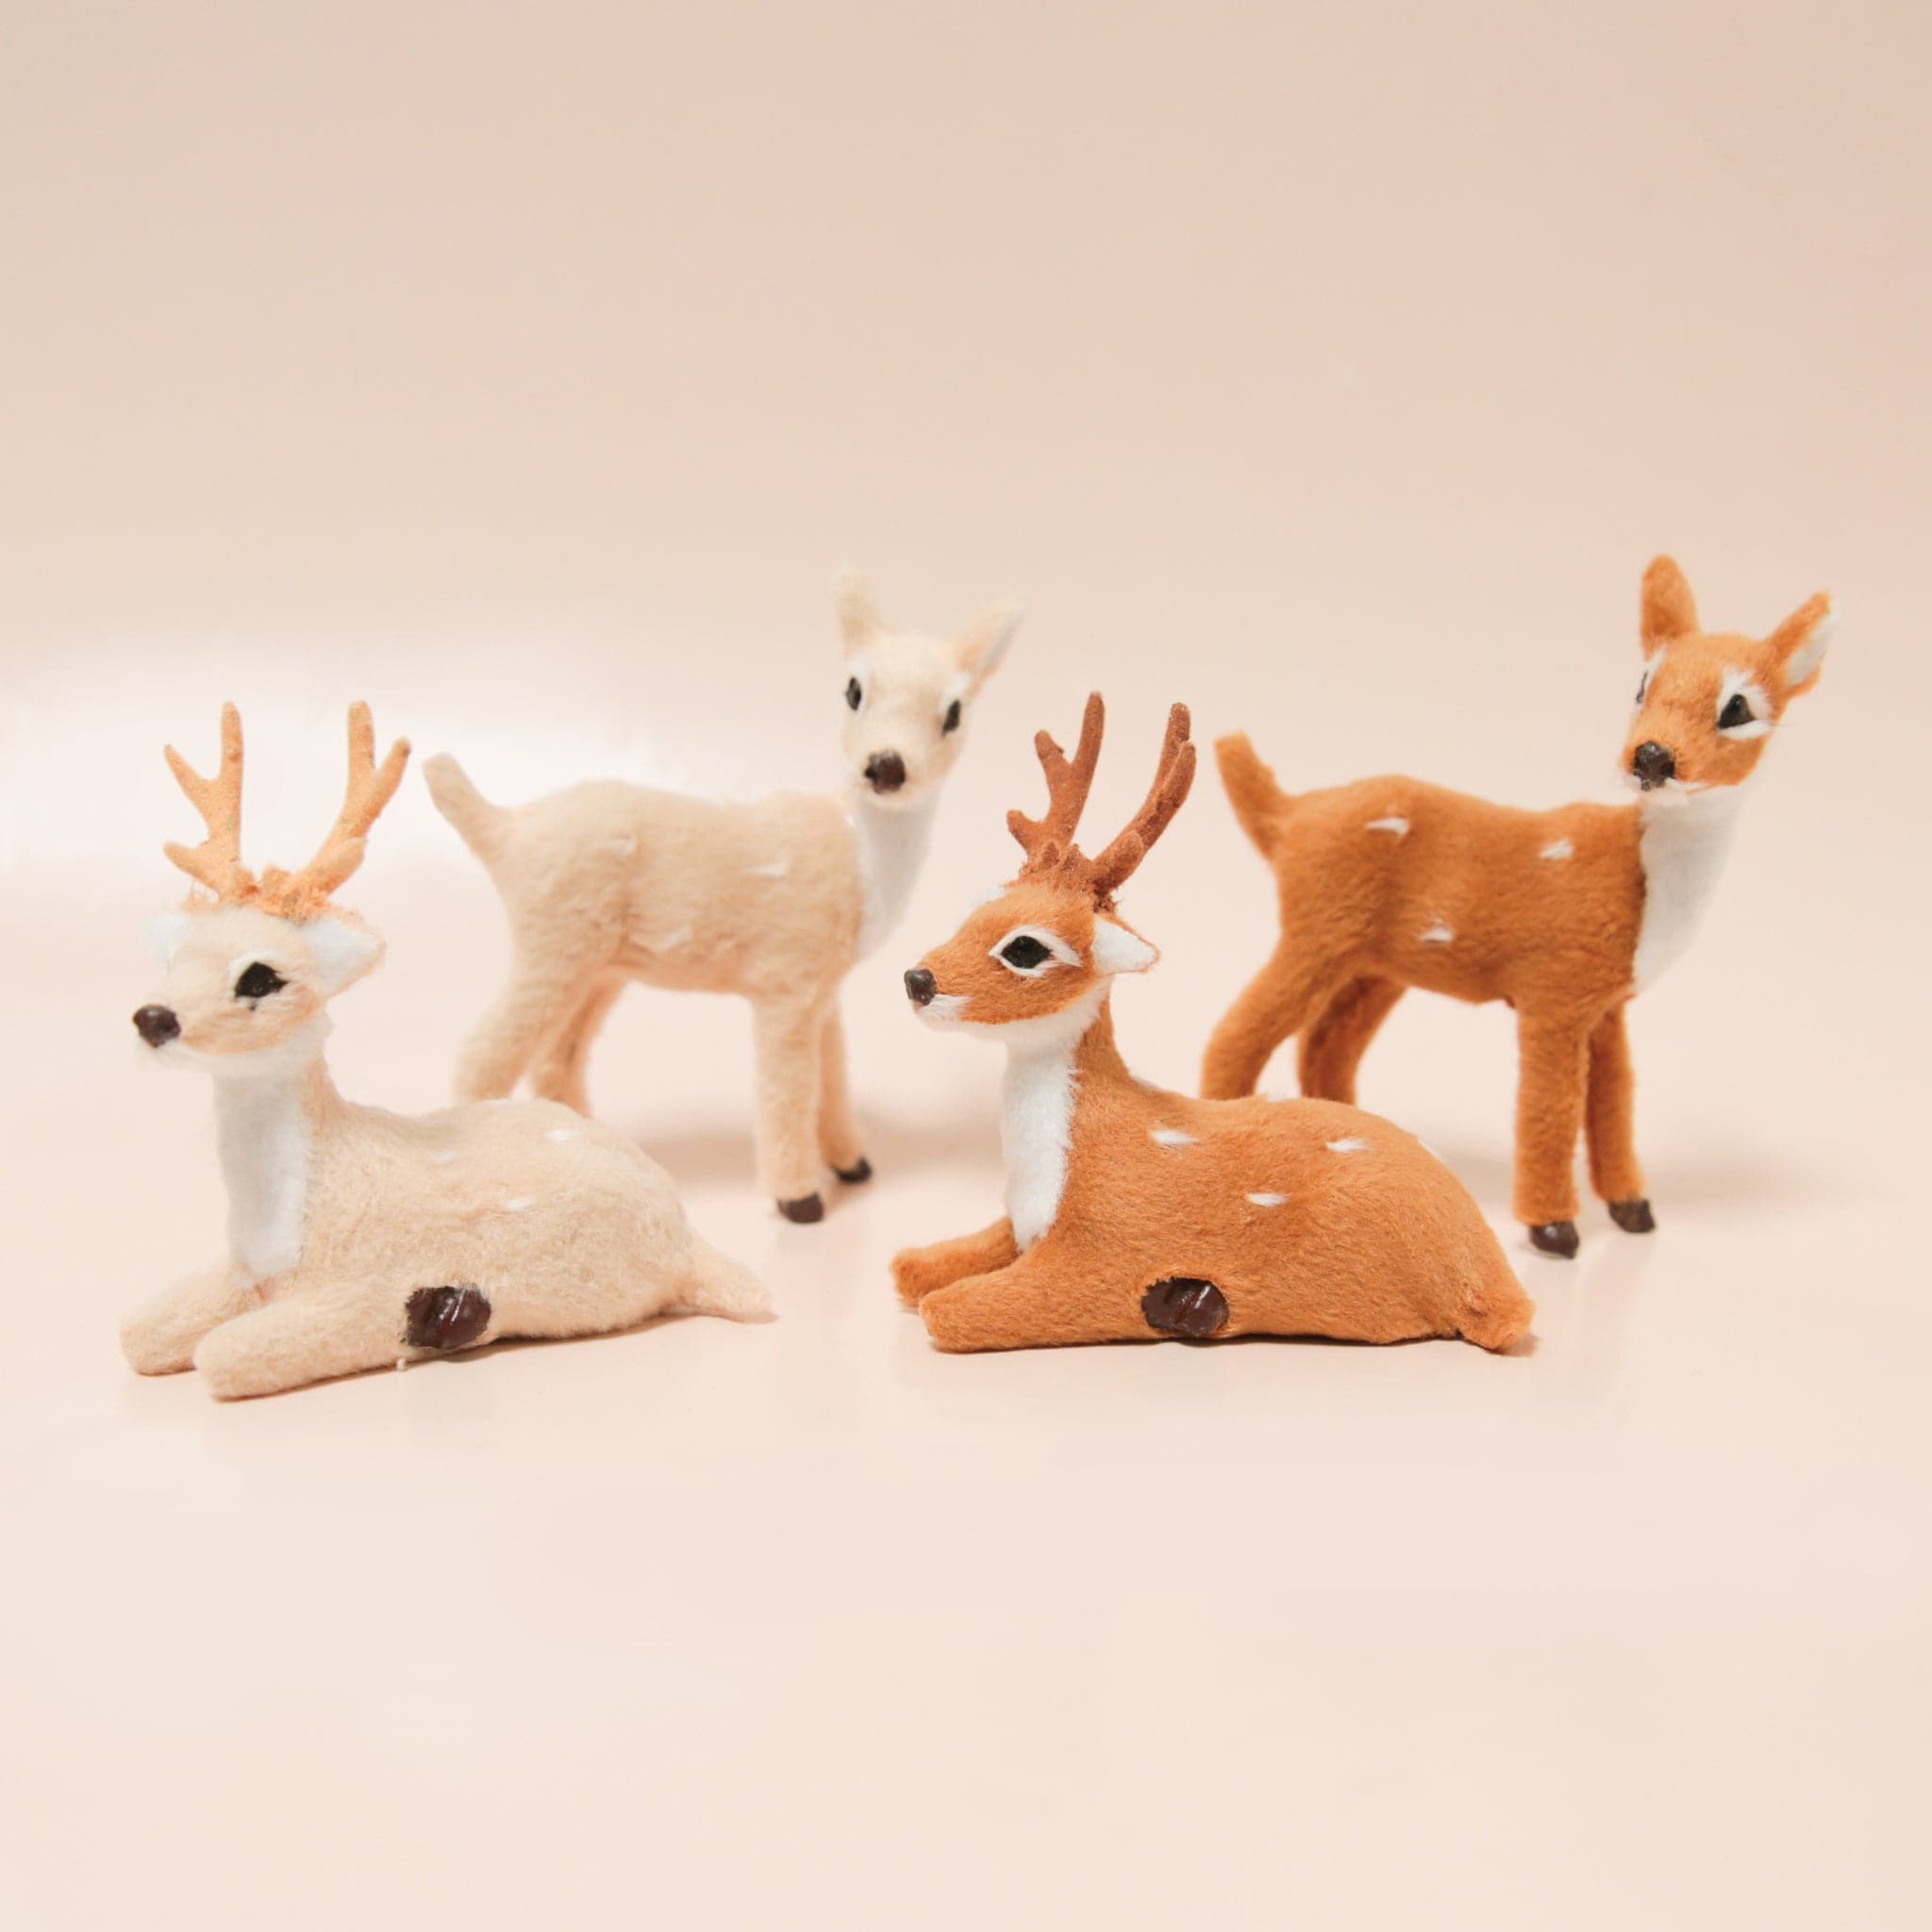 A variety of reindeer figures in brown and cream rest on a light peach background